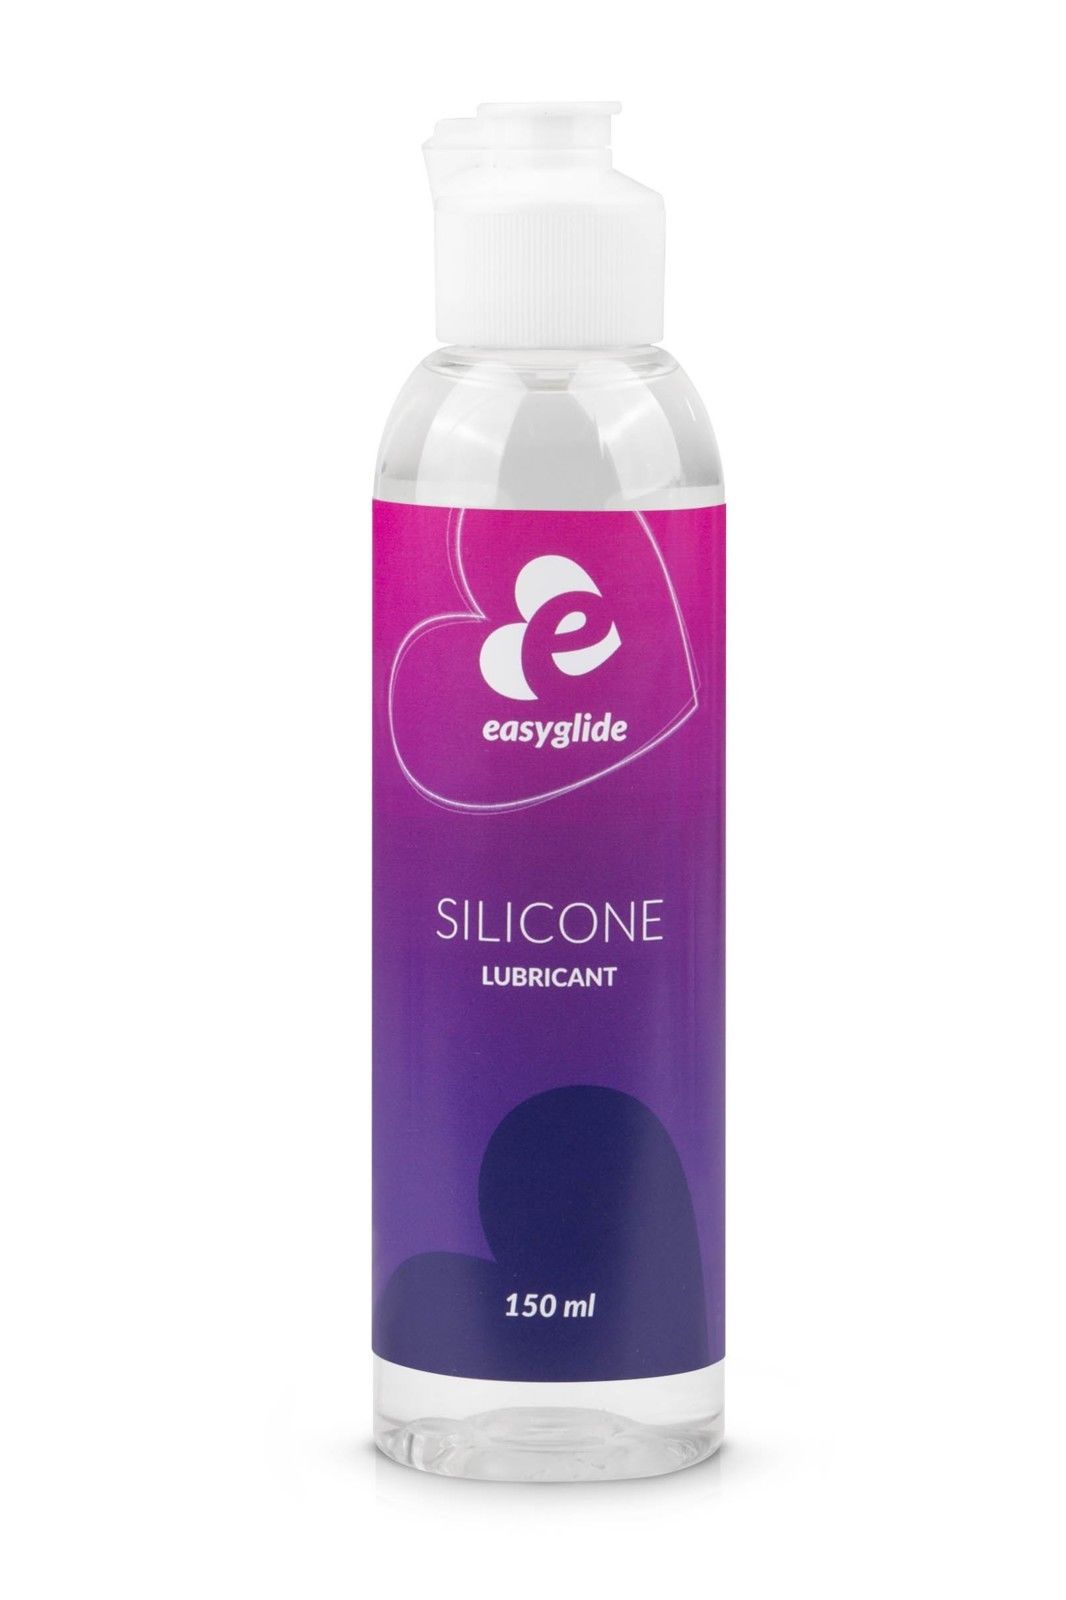 Easyglide Silicone Lubricant 150ml